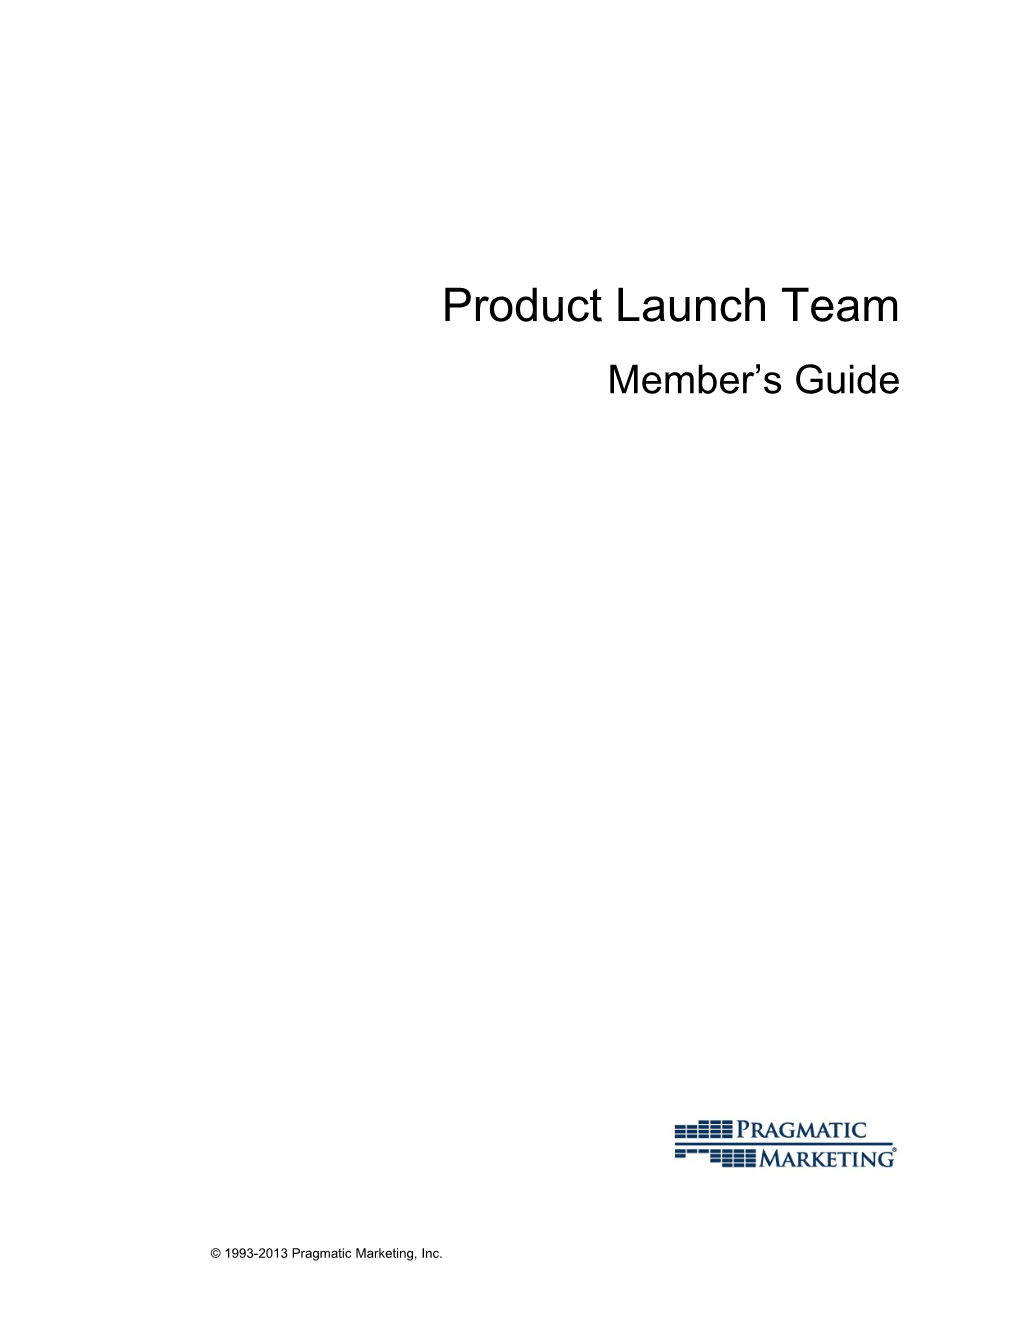 Product Launch Team Member's Guide